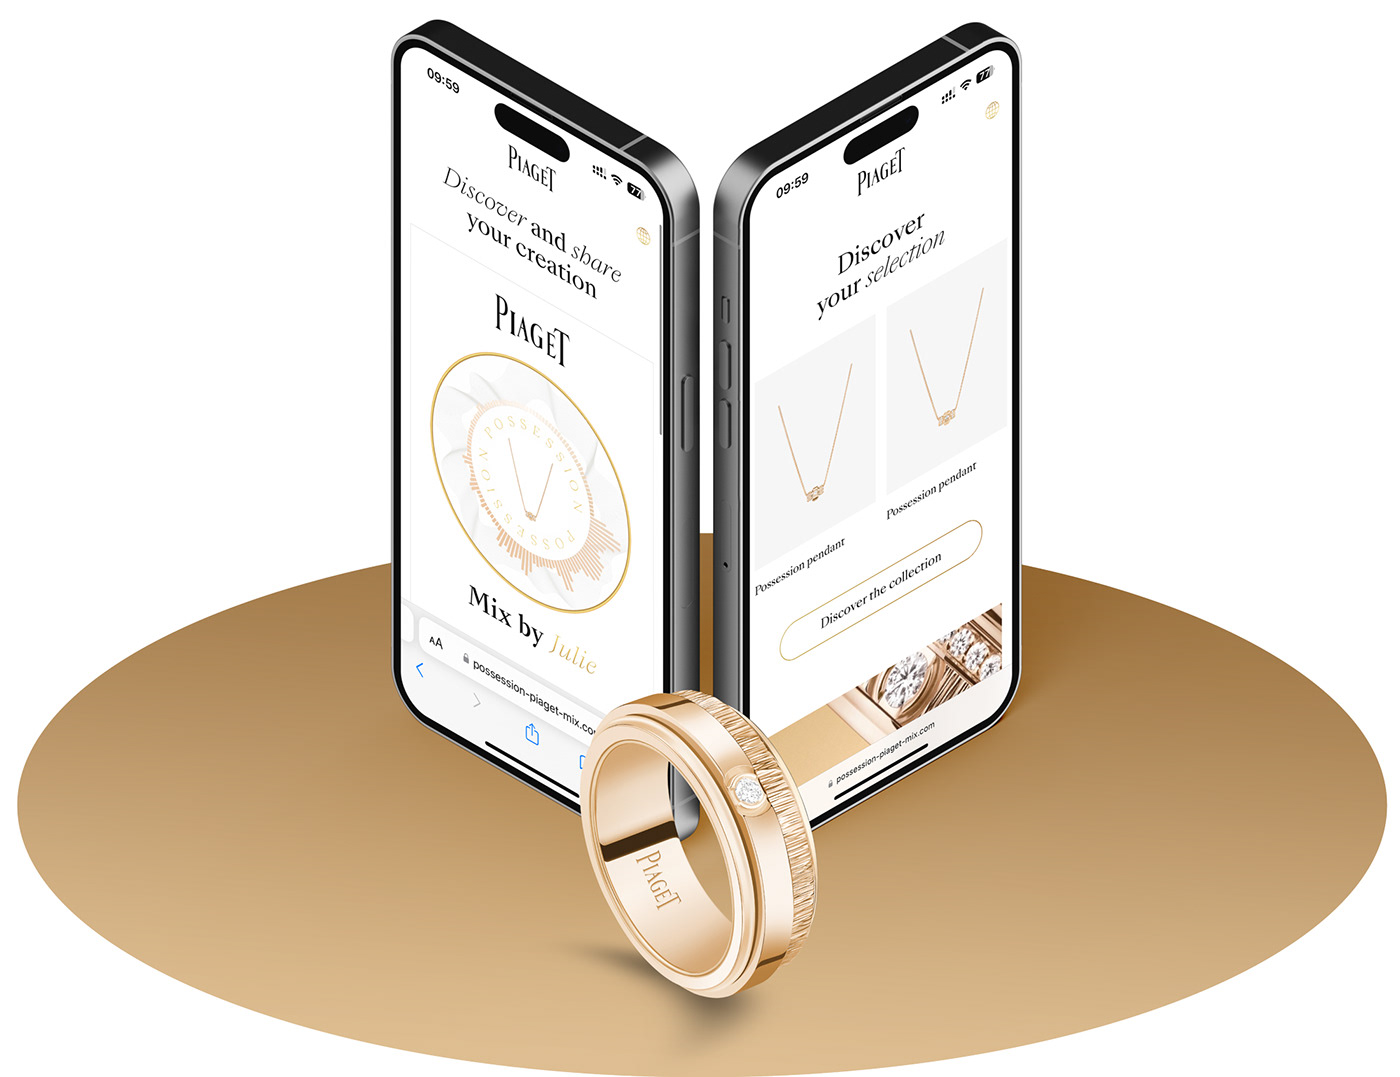 piaget possession mobile experience UI/UX user experience